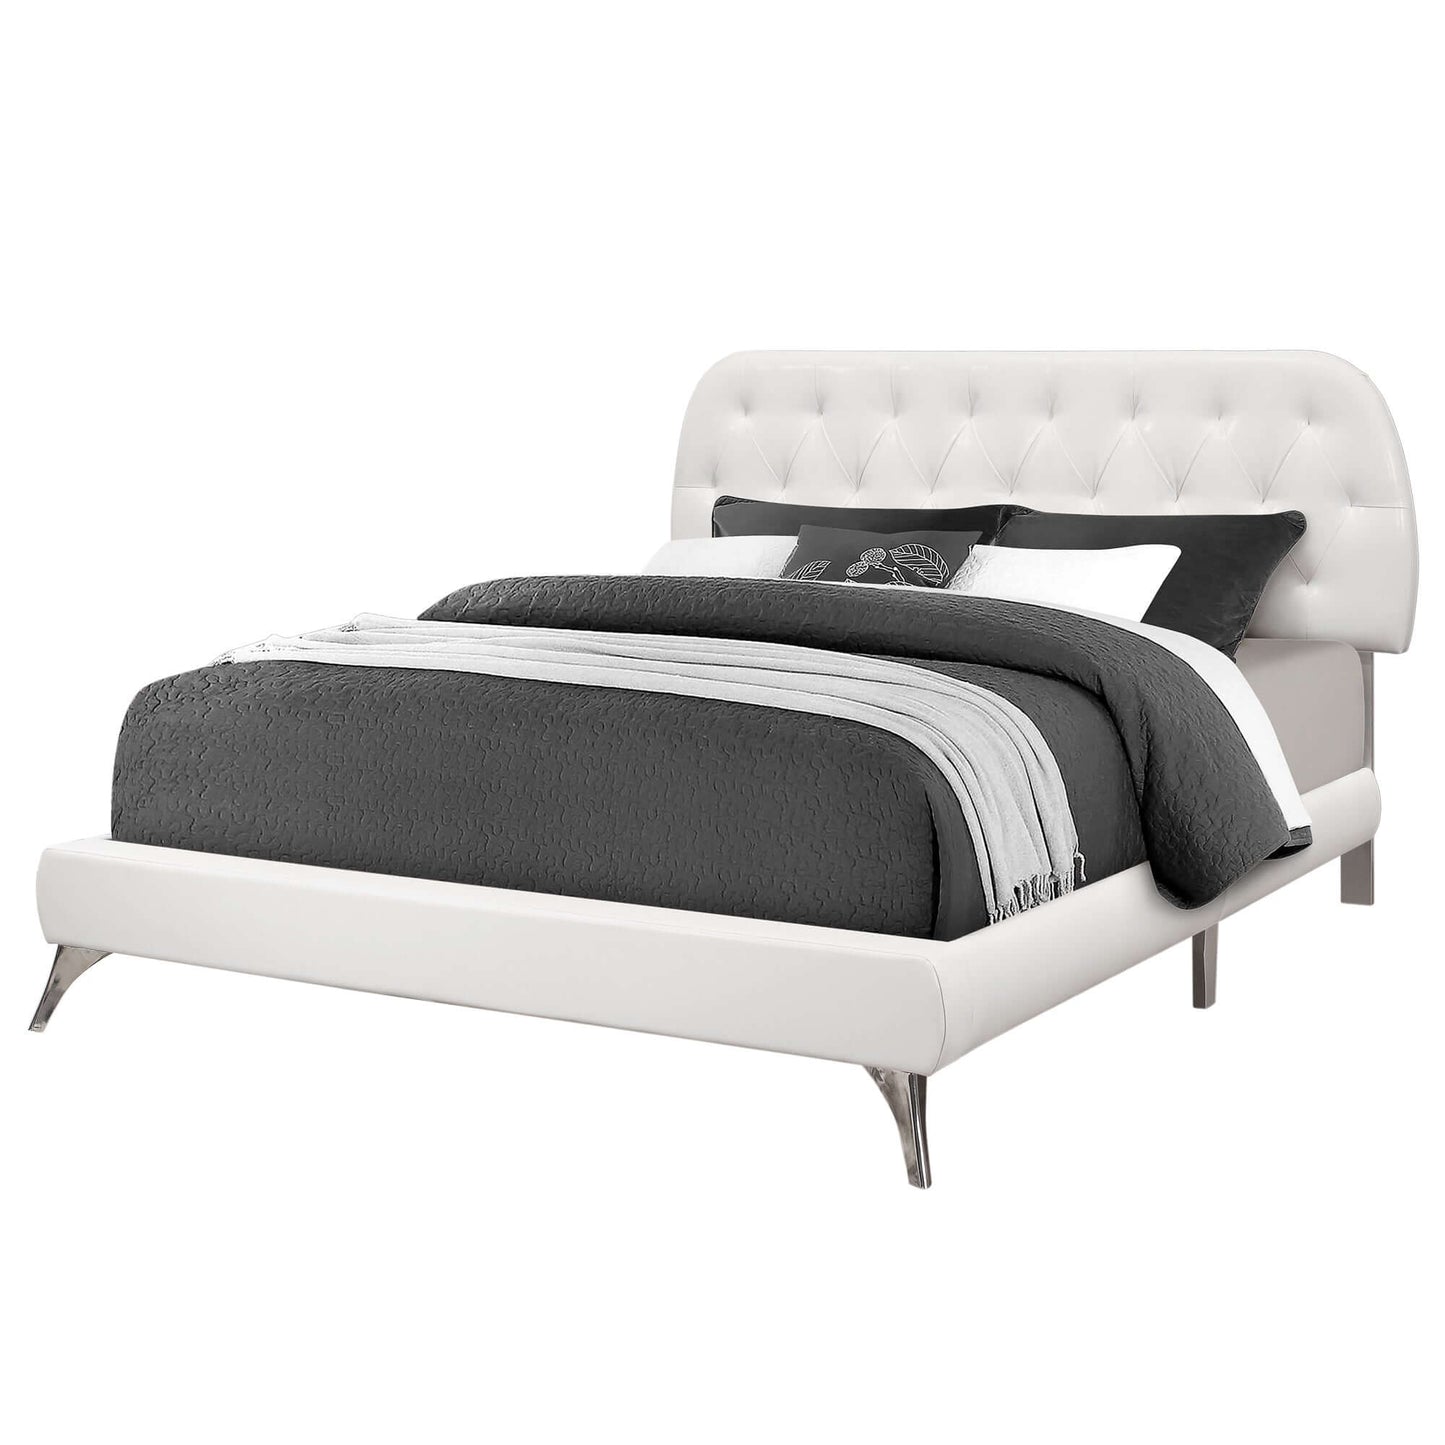 Transitional Upholstered Bed in White Leather Look with Chrome Wood Legs